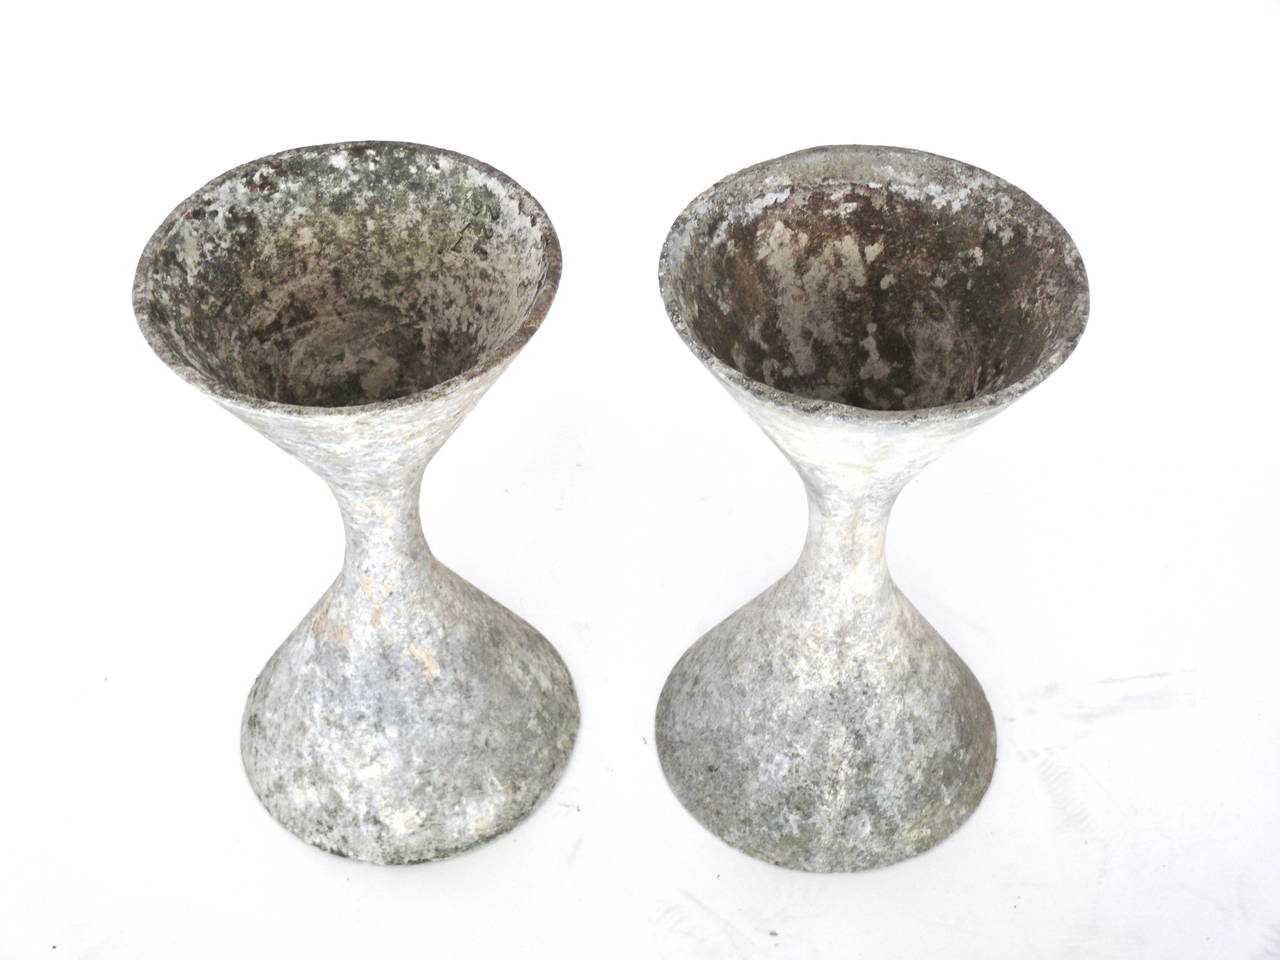 Fantastic pair of concrete hourglass planters by the Swiss Architect, Willy Guhl. Great age, patina, and coloring. Iconic sculptural planter or garden object. Priced as a pair.